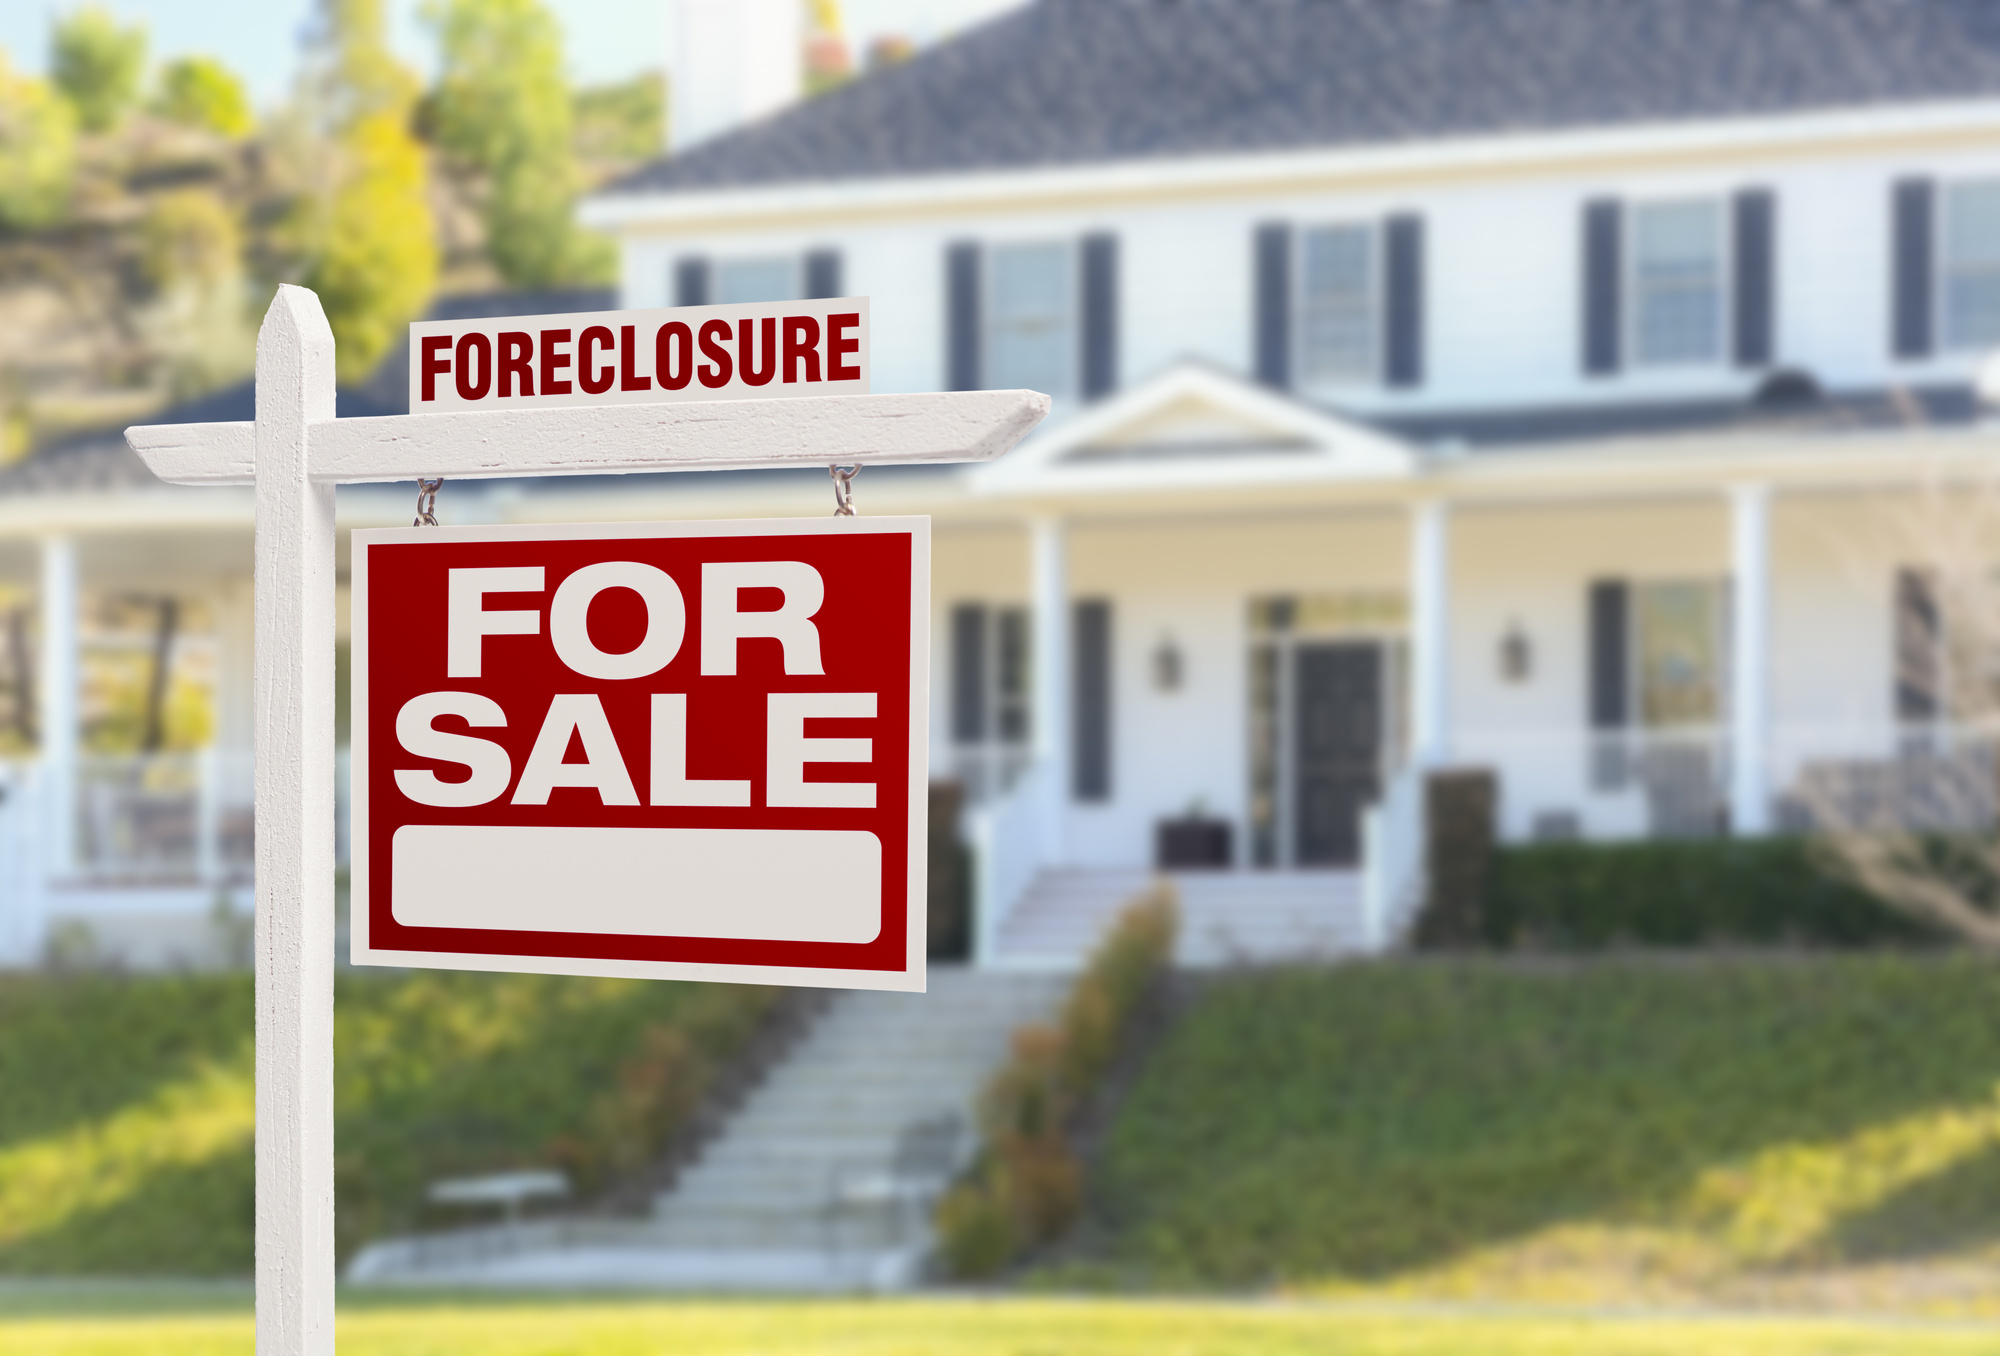 how to stop foreclosure